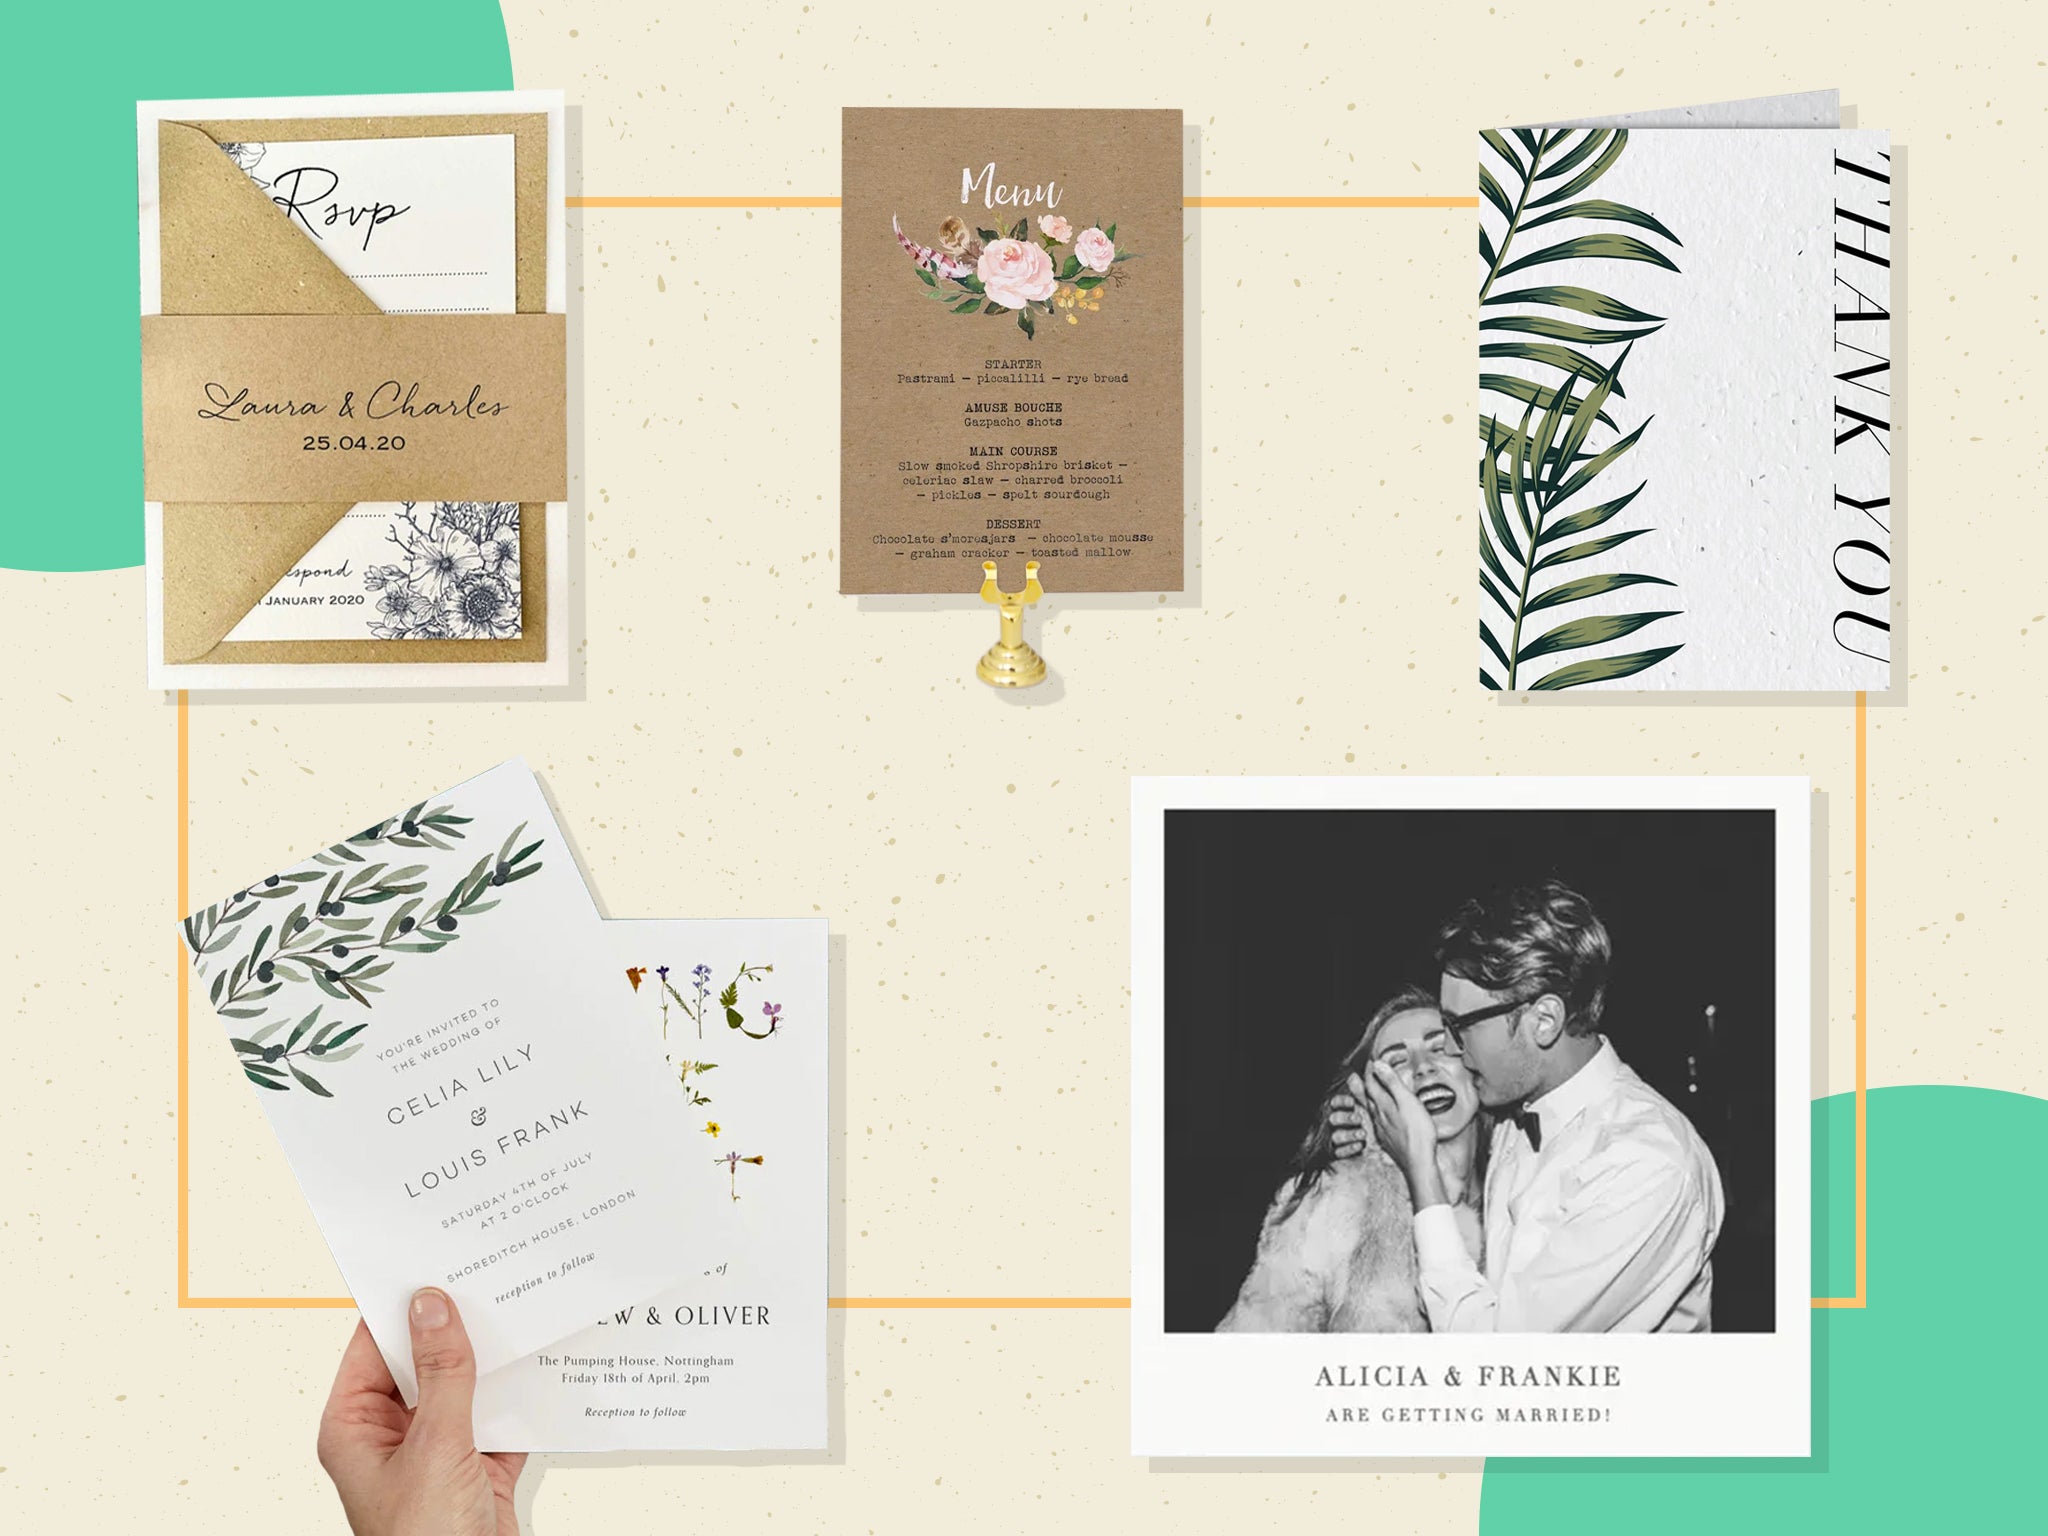 Wedding stationery brands UK: From bespoke to pre-designed options